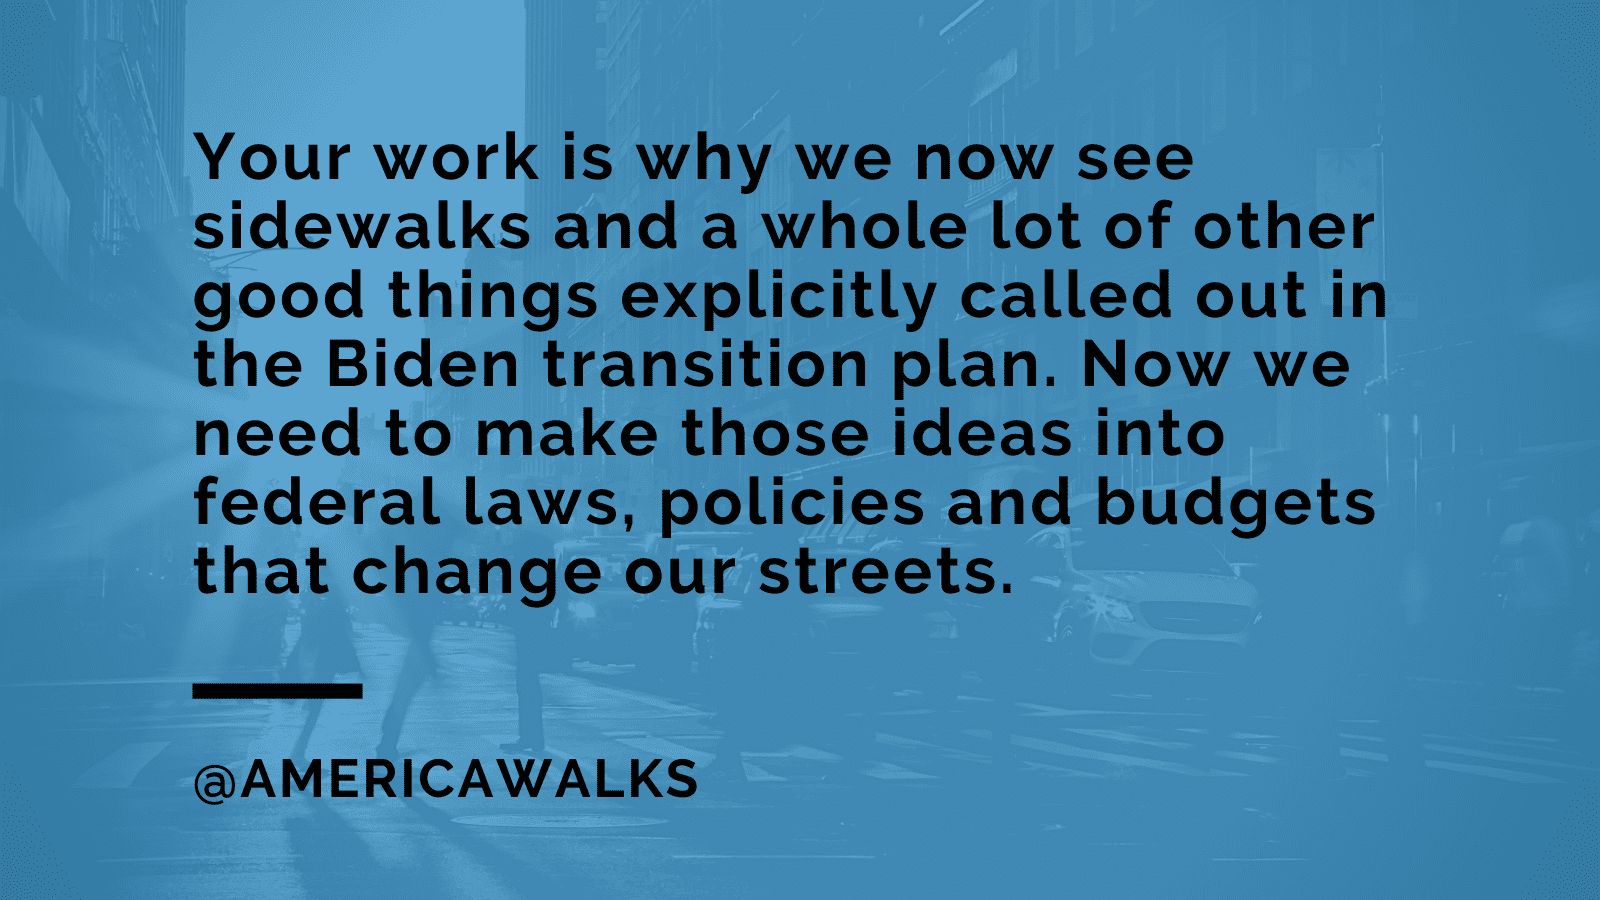 A blue suare with the text " Your work is why we now see sidewalks and a whole lot of other good things explicityly called out in the Biden transition plan. Now we need to make those ideas into federal laws, policies, and budgets that change our streets. " 